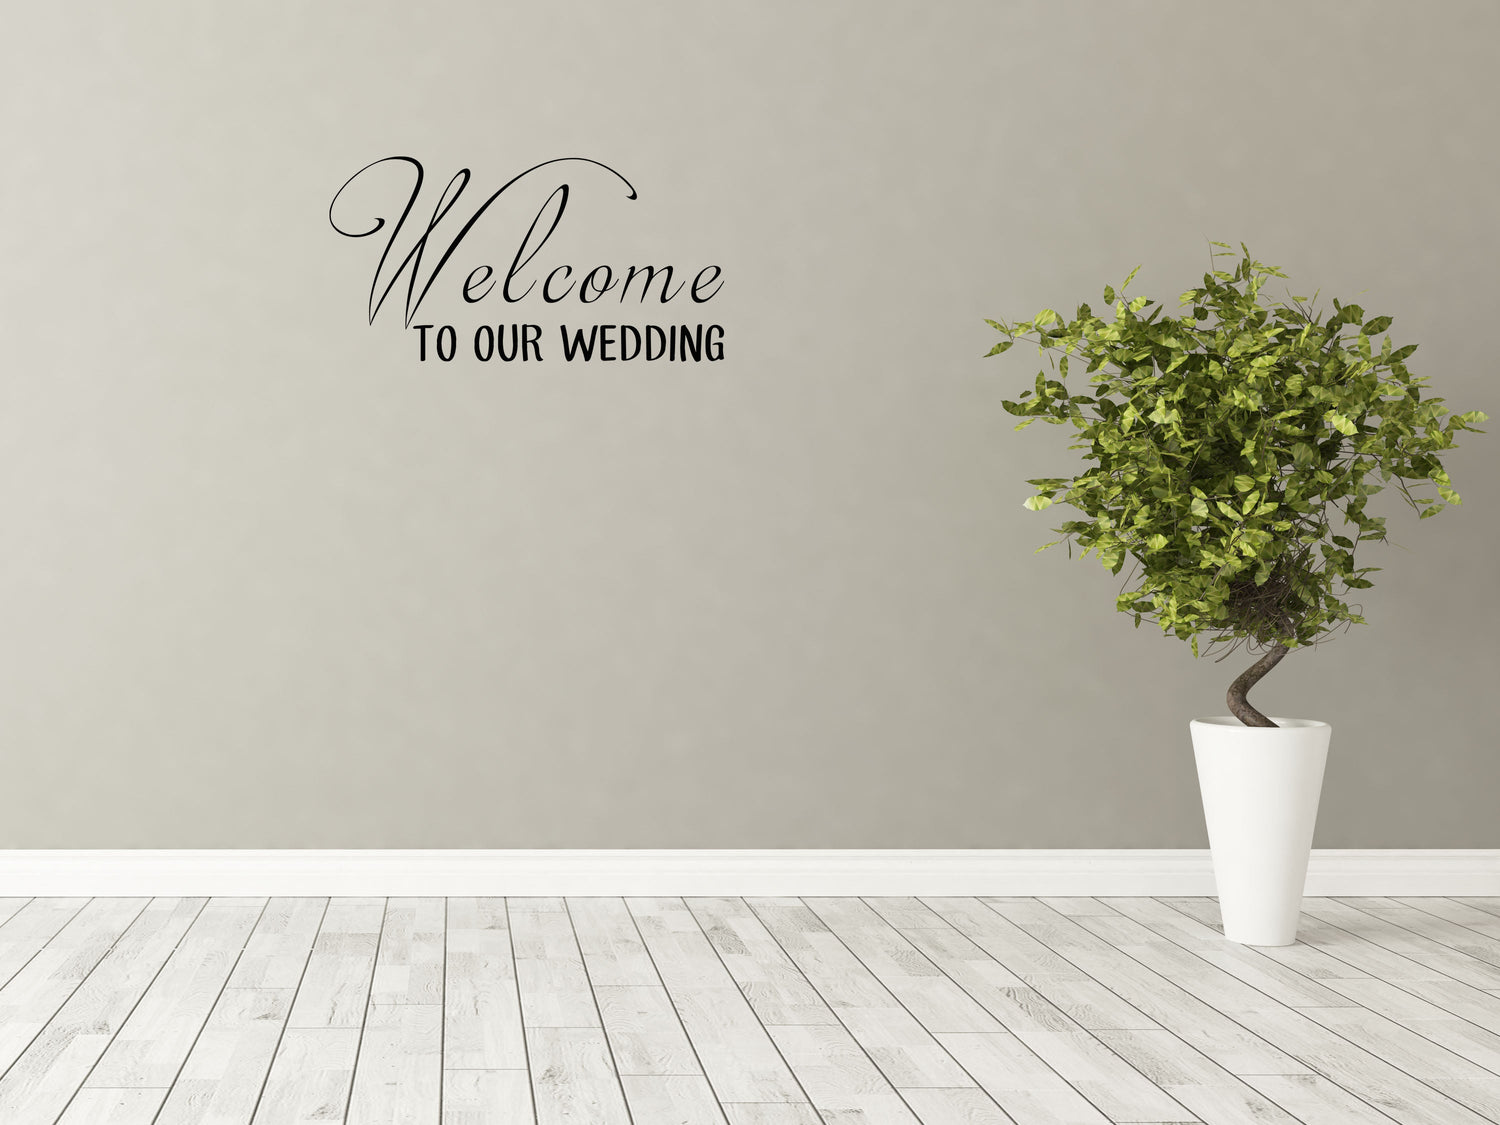 Welcome To Our Wedding Vinyl Wall Decal Inspirational Wall Signs 